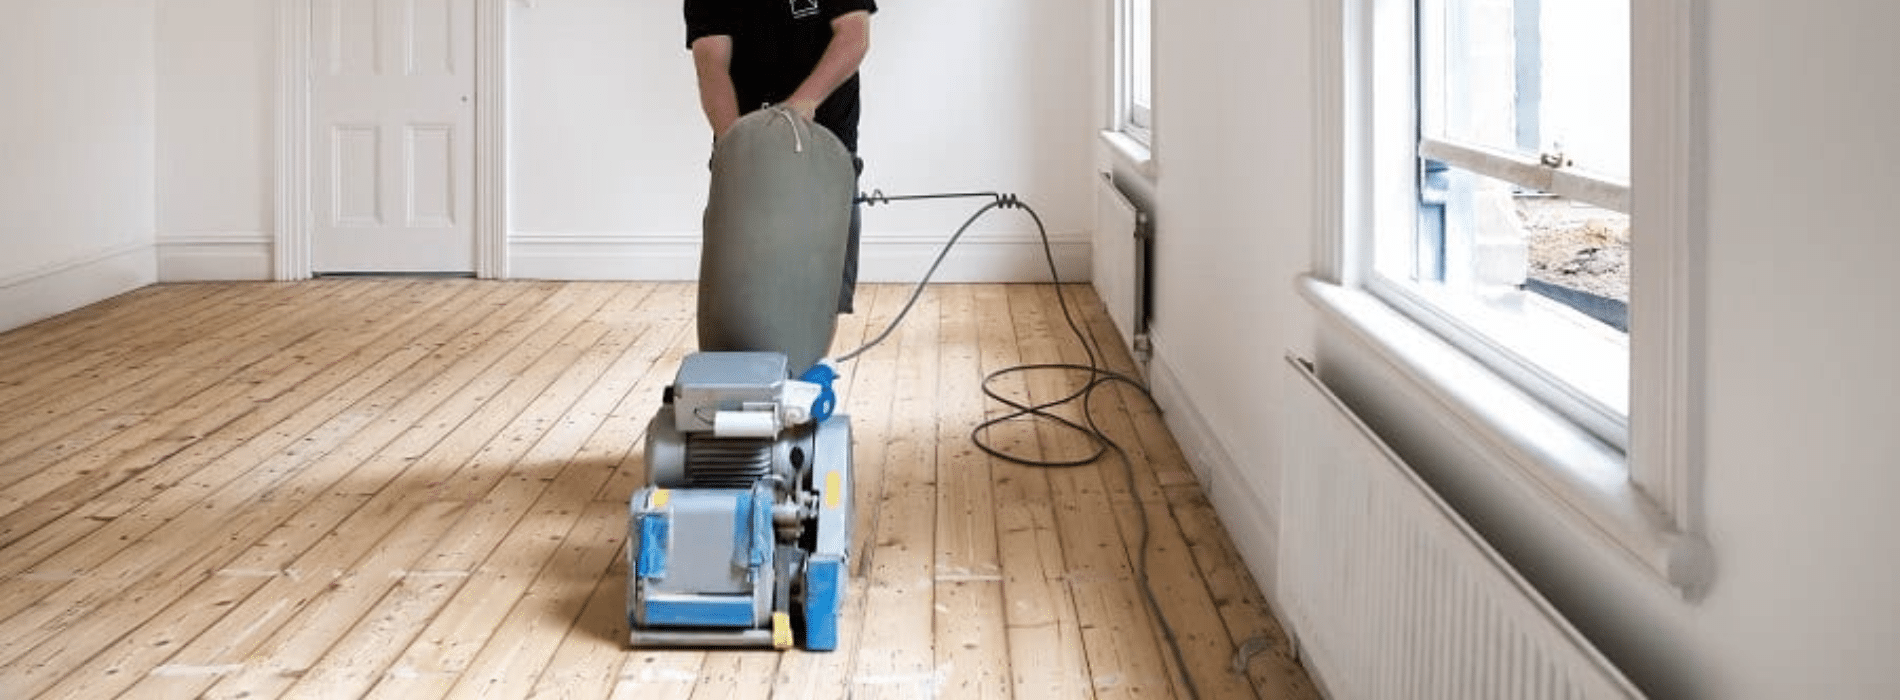 Mr Sander® working on a parquet floor in Brompton, SW3 with a 2.2kW, 220V Bona belt sander. The team's dedication to delivering top-notch floor restoration outcomes is demonstrated by the HEPA-filtered dust extraction system, which guarantees a clean, effective sanding operation. 